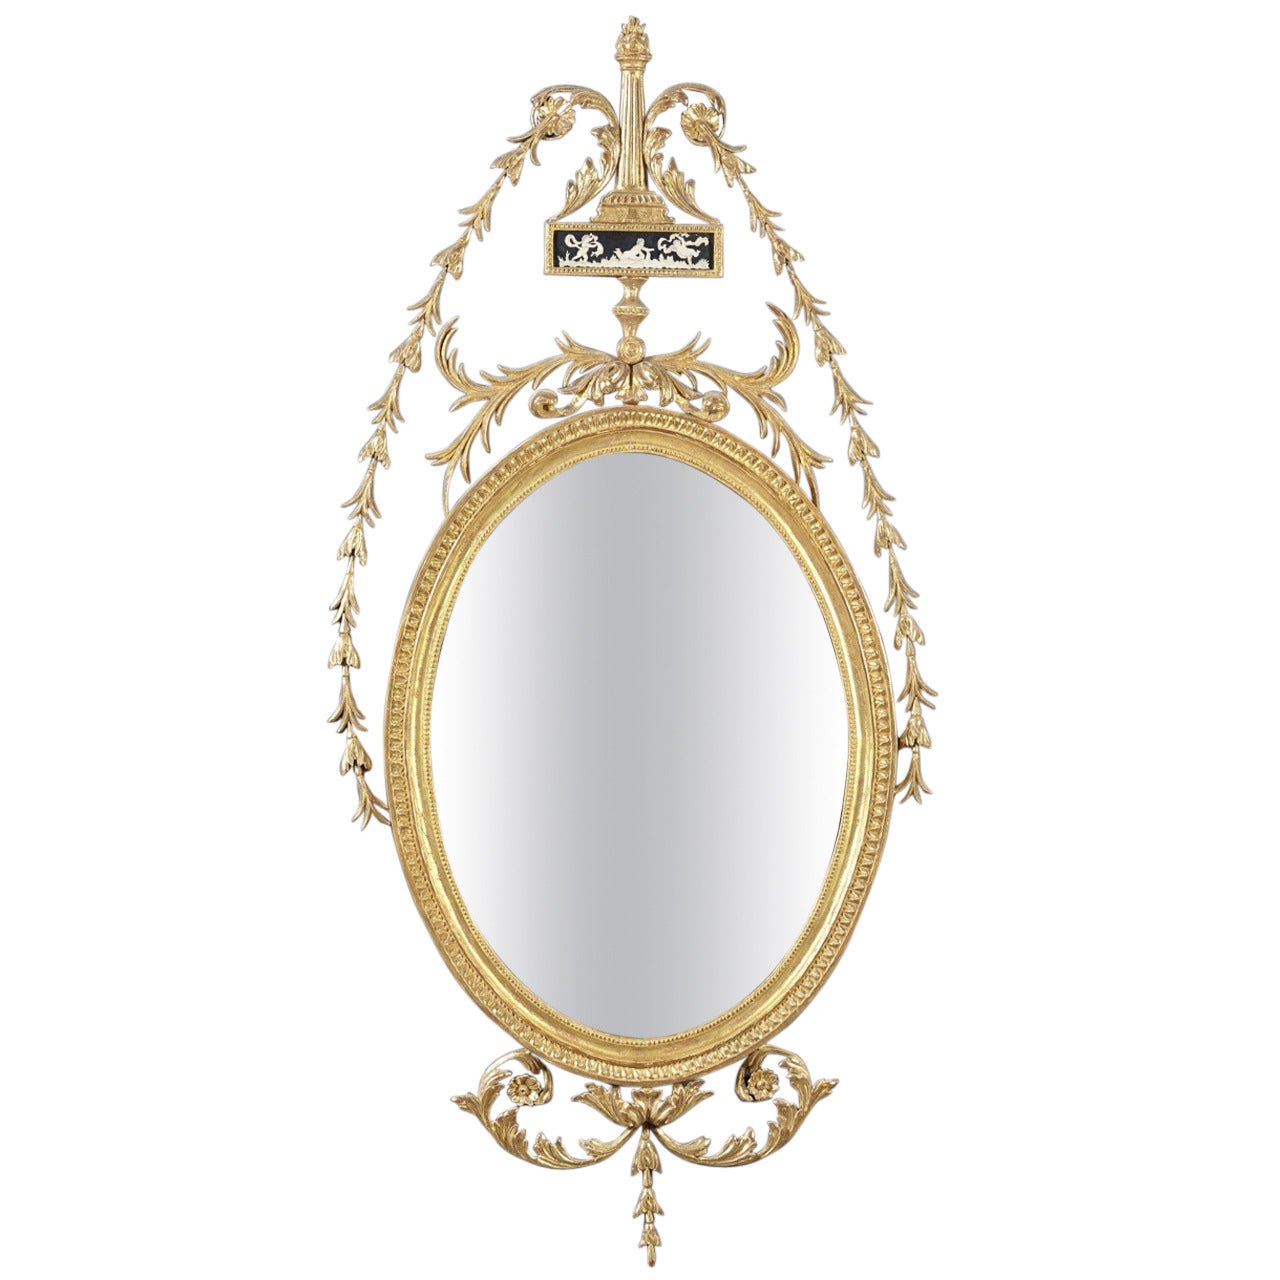 Fine English Hepplewhite Period Carved Giltwood Oval Mirror, circa 1770 For Sale